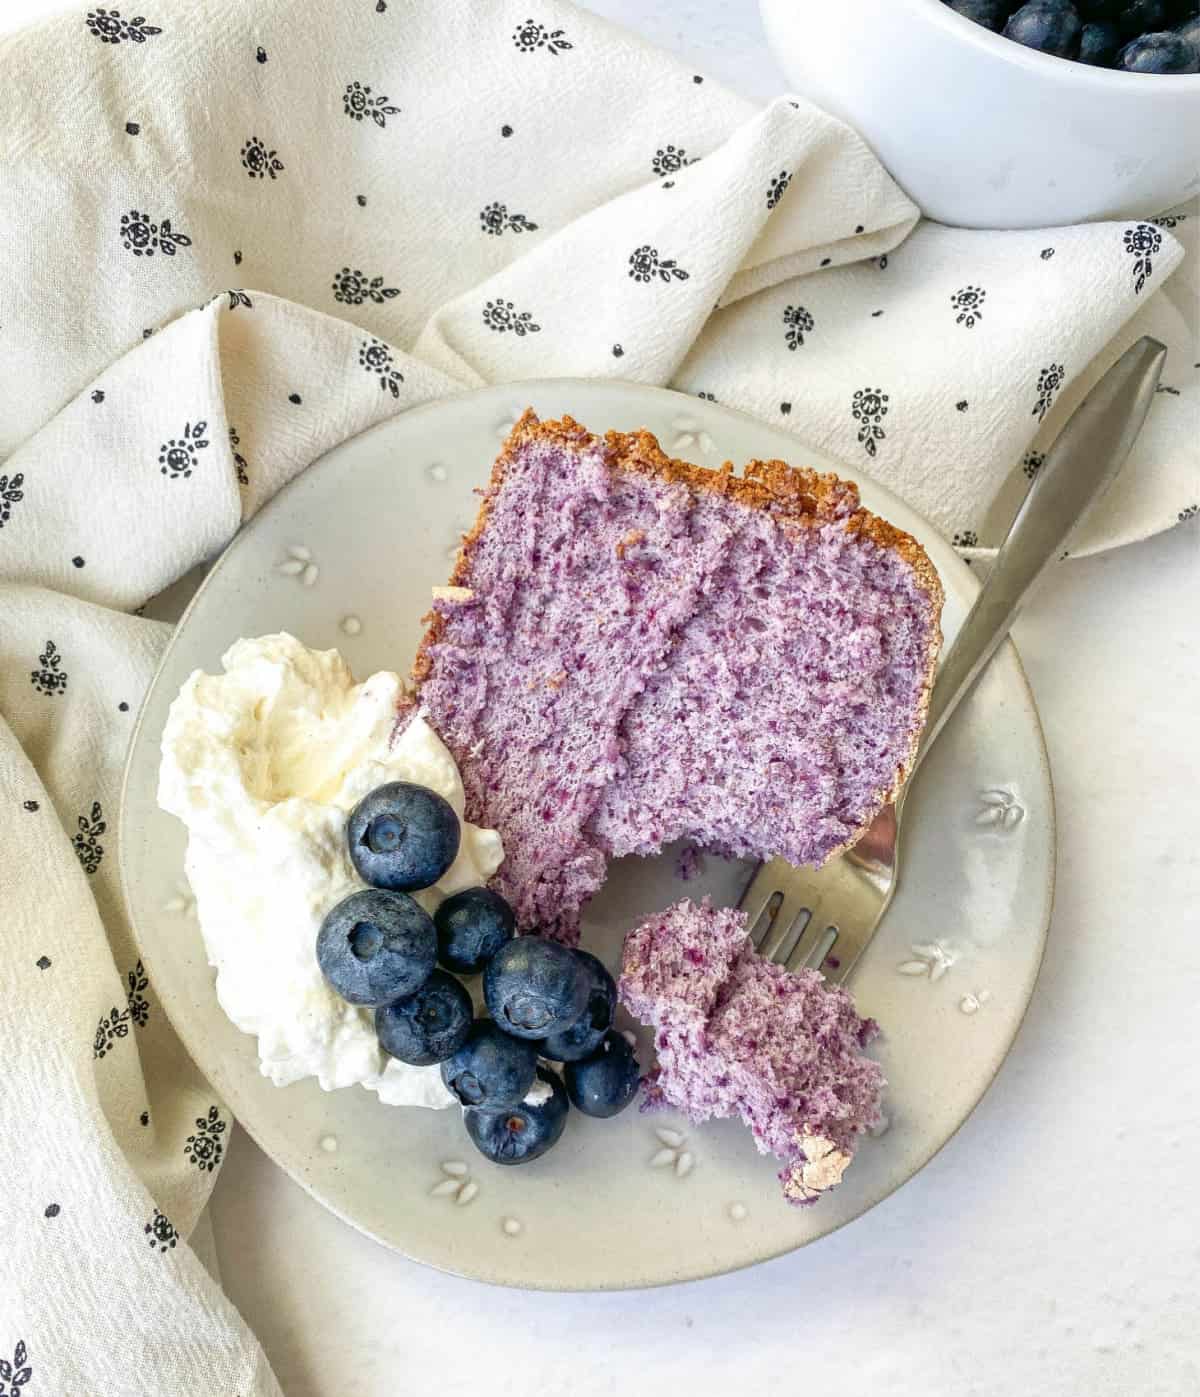 Top view of slice of Blueberry Angel Food Cake.